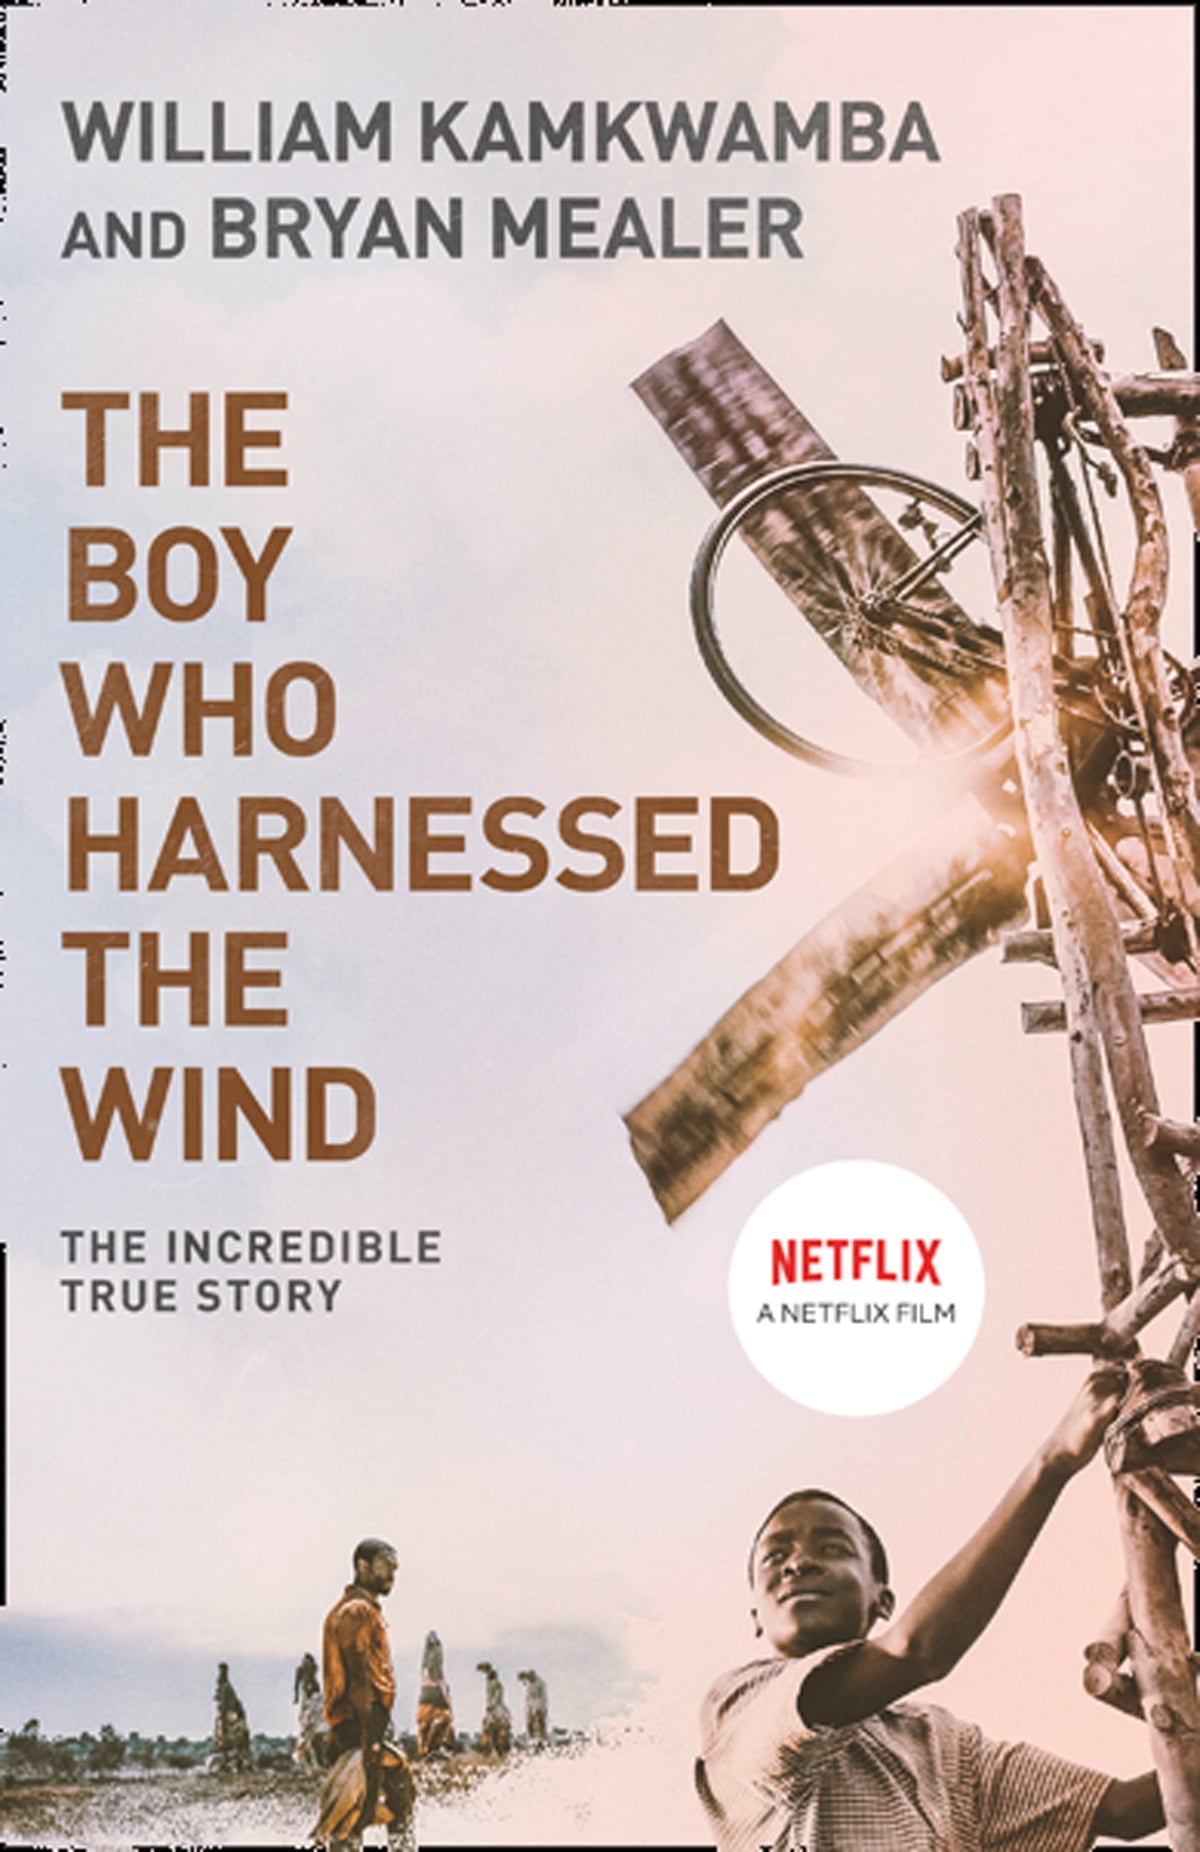 The Boy Who Harnessed the Wind-Inspiring Movies on Netflix that will change your life